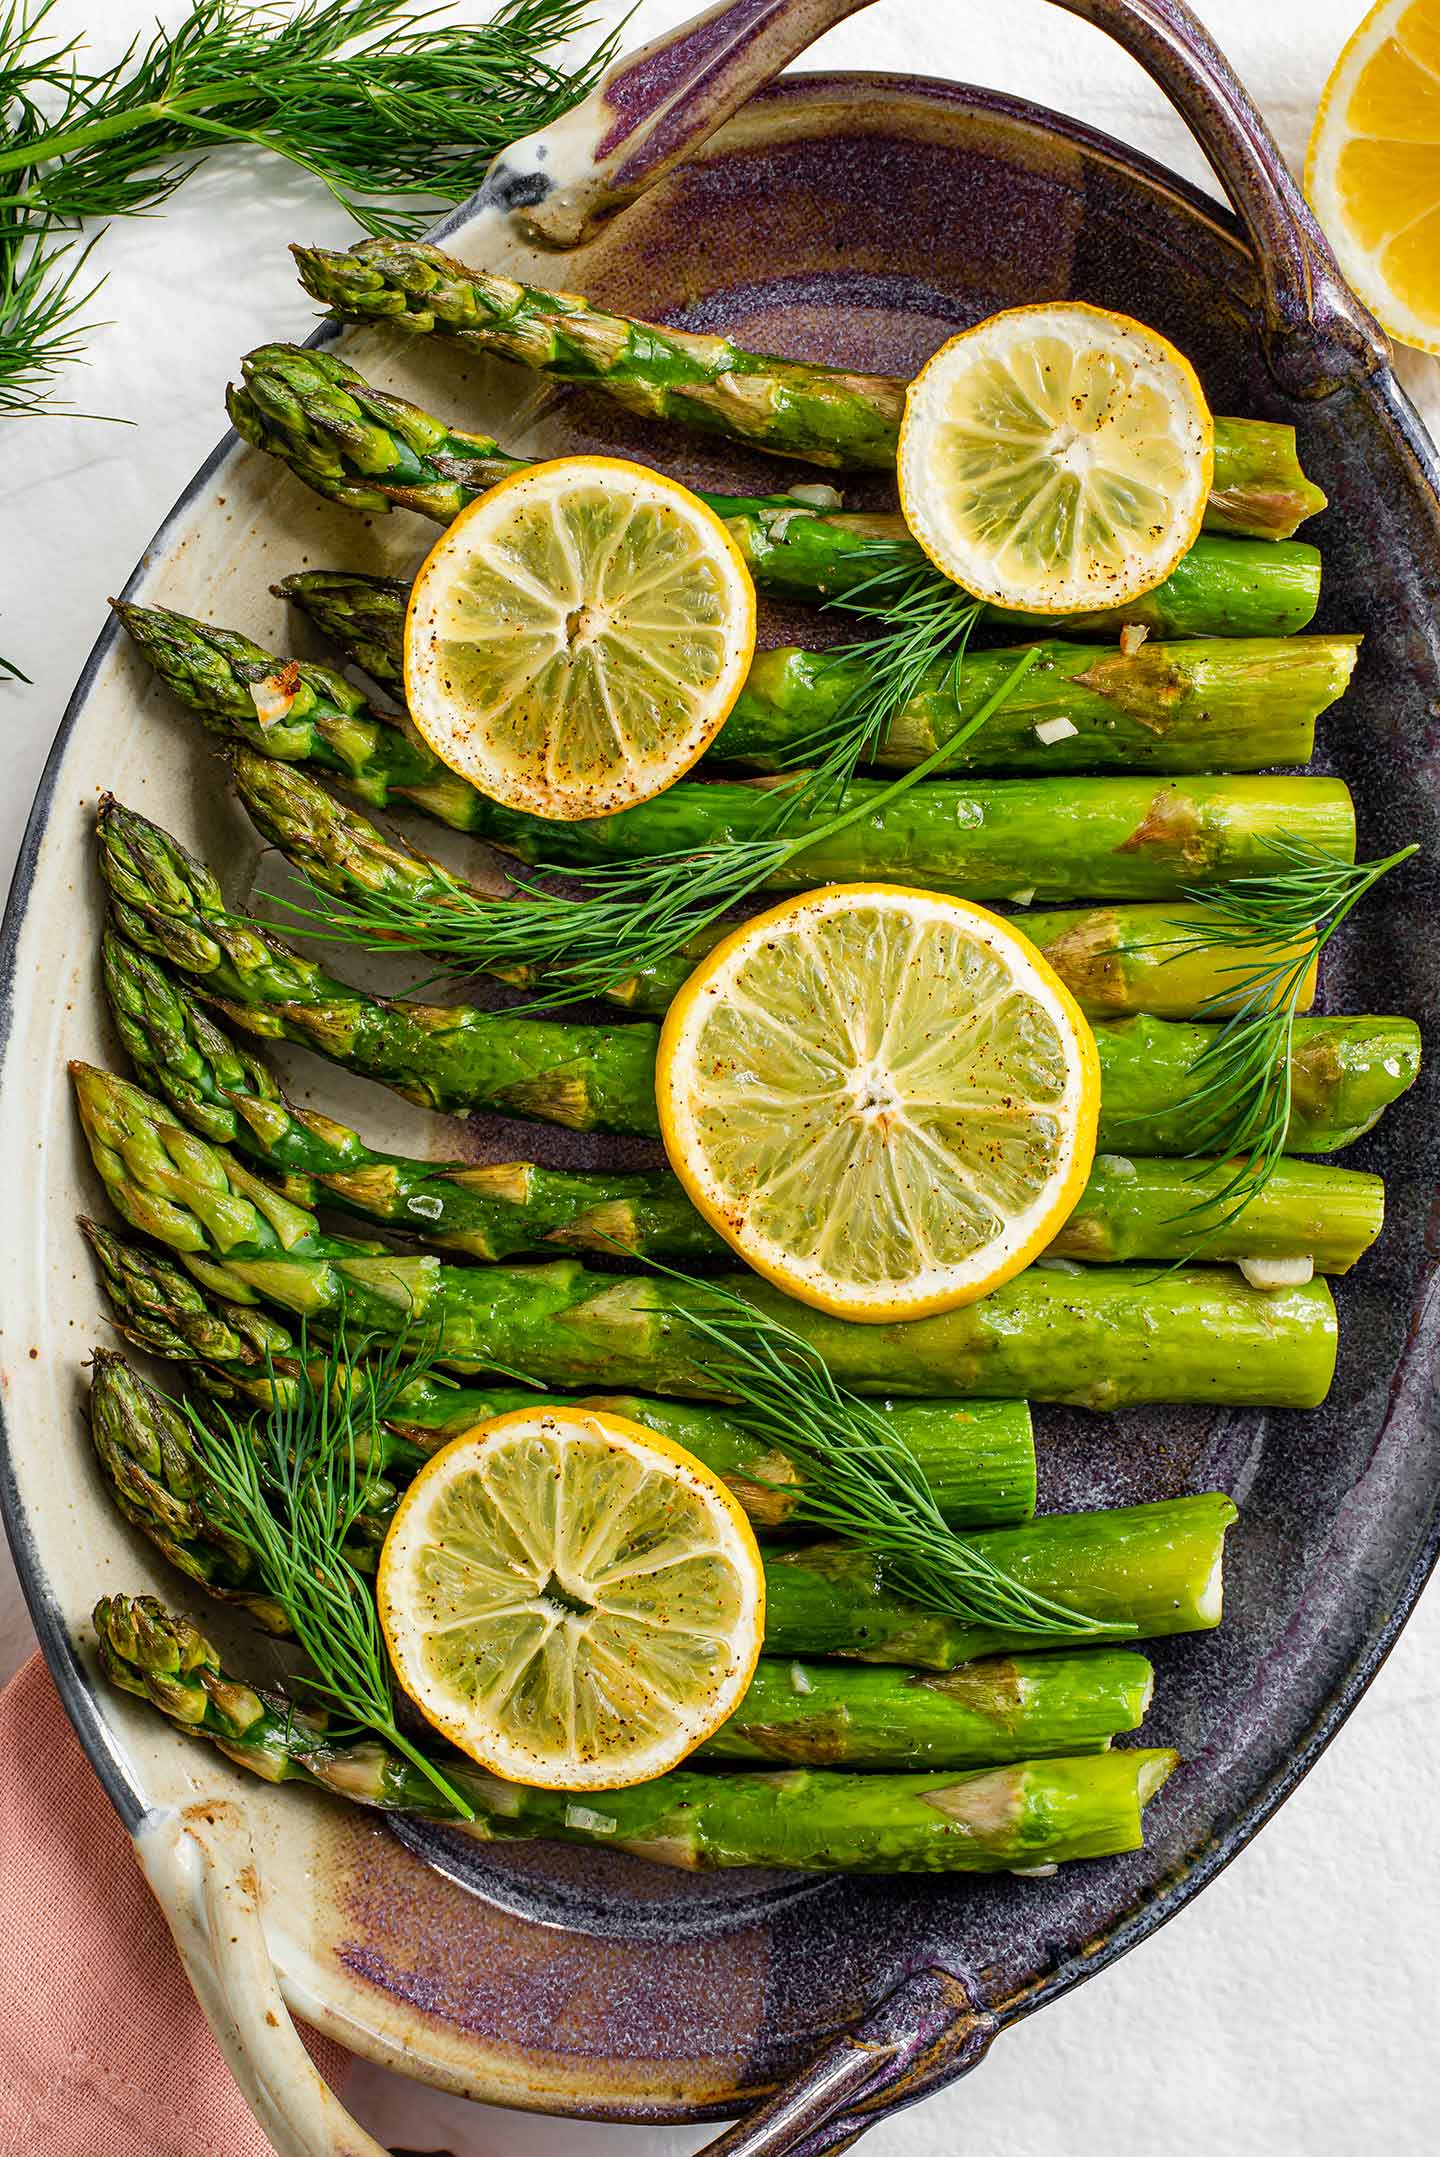 Top down view of lemon garlic roasted asparagus in a serving tray, garnished with lemon wedges and fresh dill. The spears are lightly oiled, charred, and speckled with minced garlic, salt, and pepper.